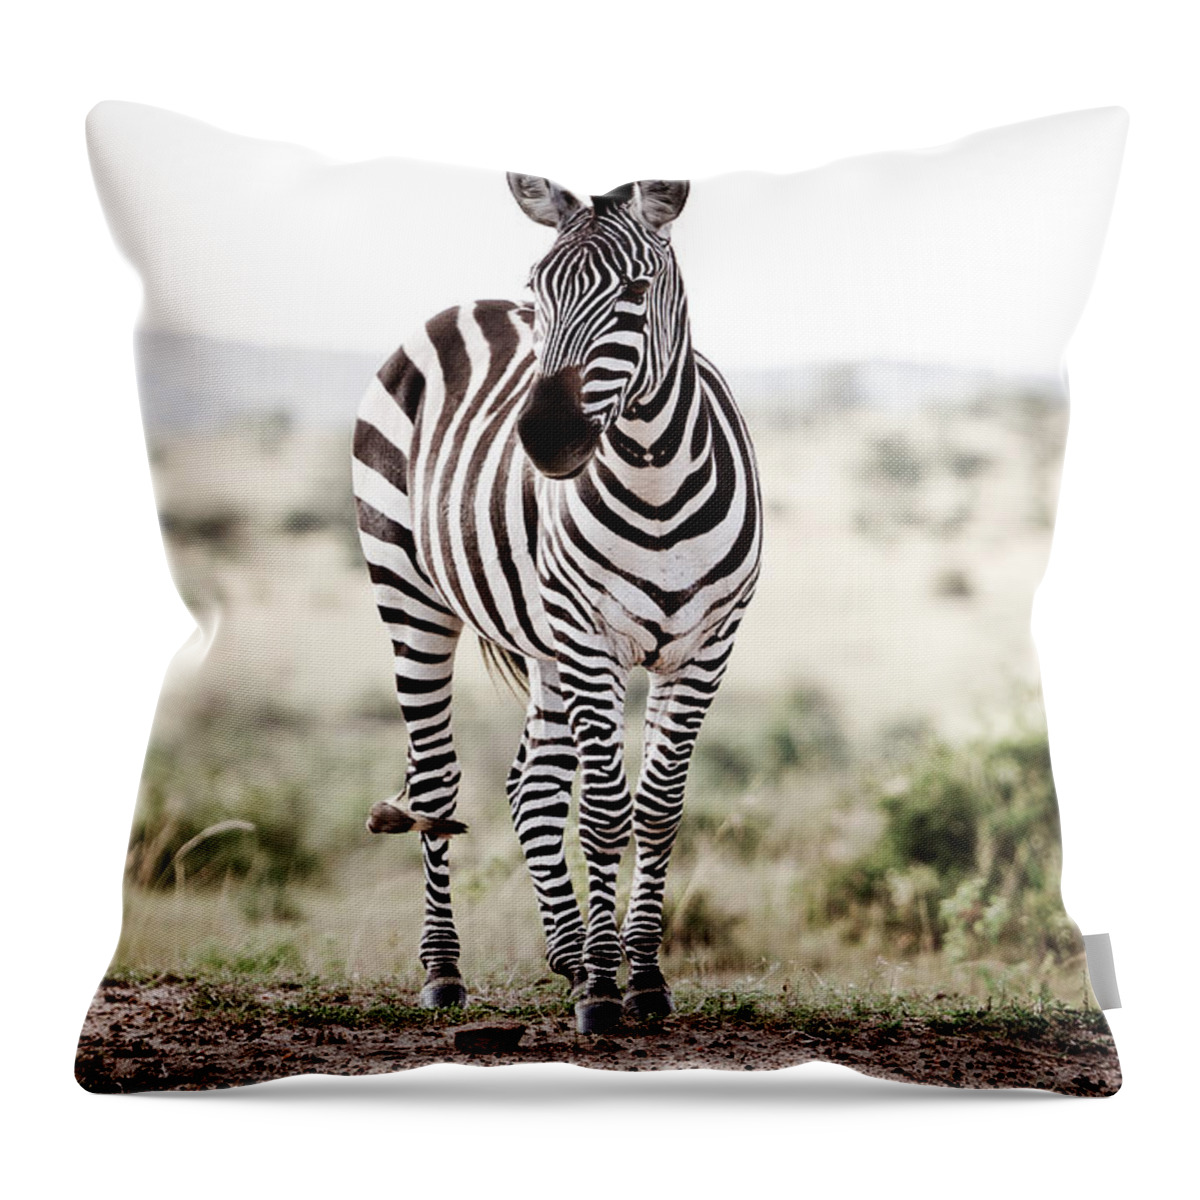 Africa Throw Pillow featuring the photograph Lone Zebra by Mike Gaudaur